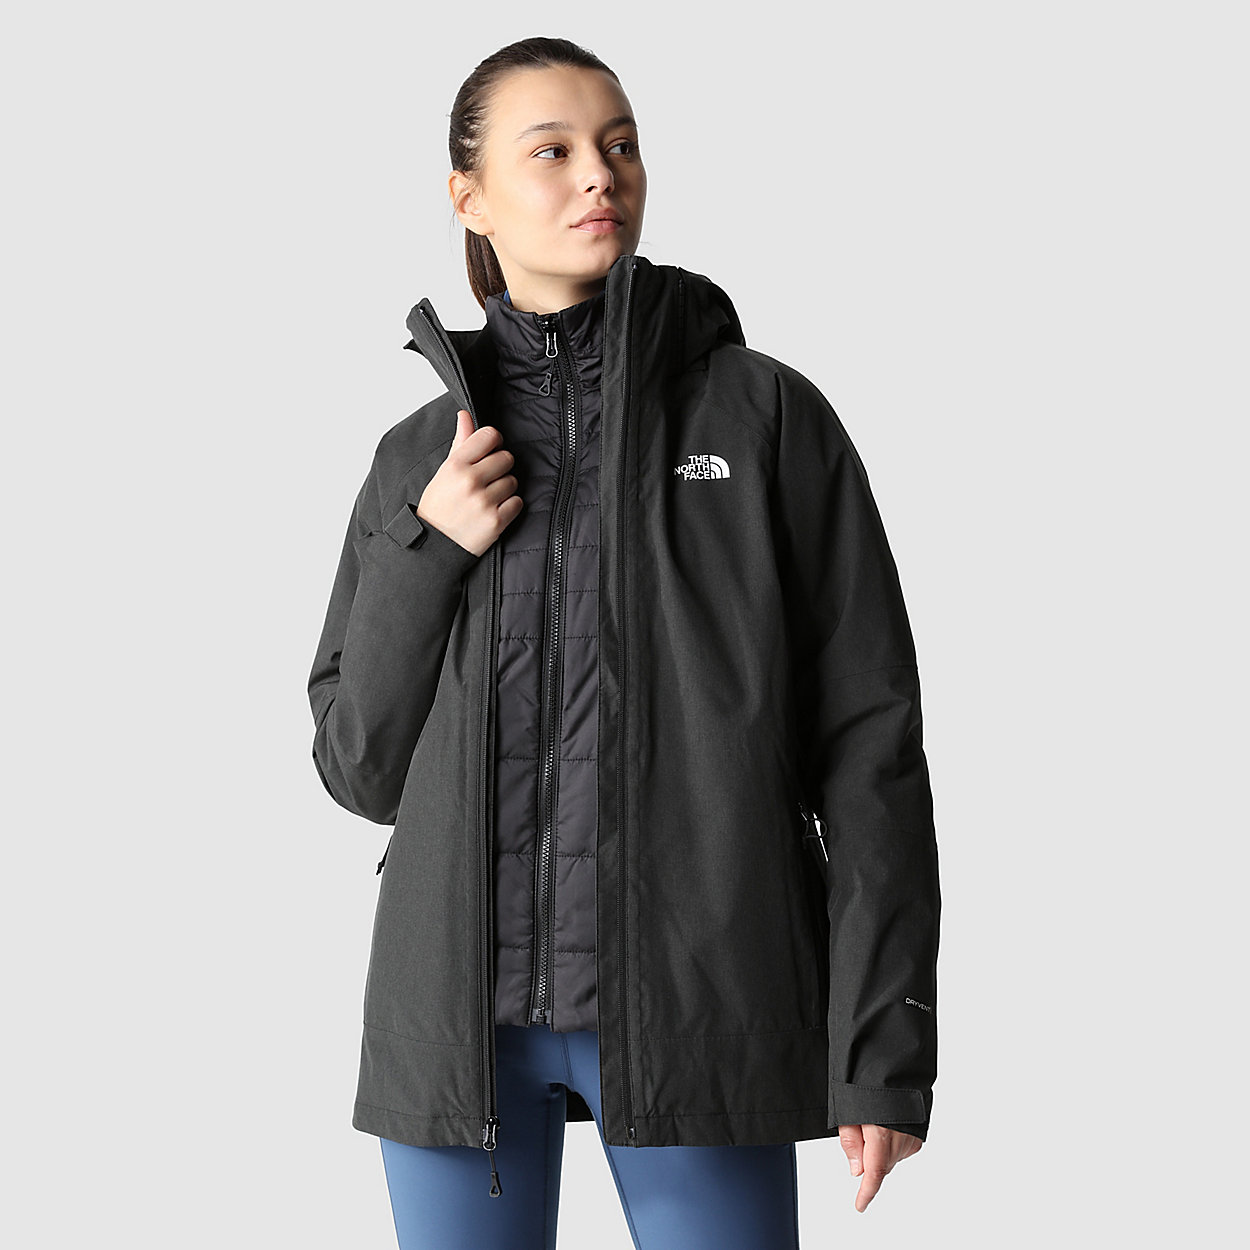 Unlock Wilderness' choice in the Mountain Warehouse Vs North Face comparison, the Inlux Triclimate Jacket by The North Face